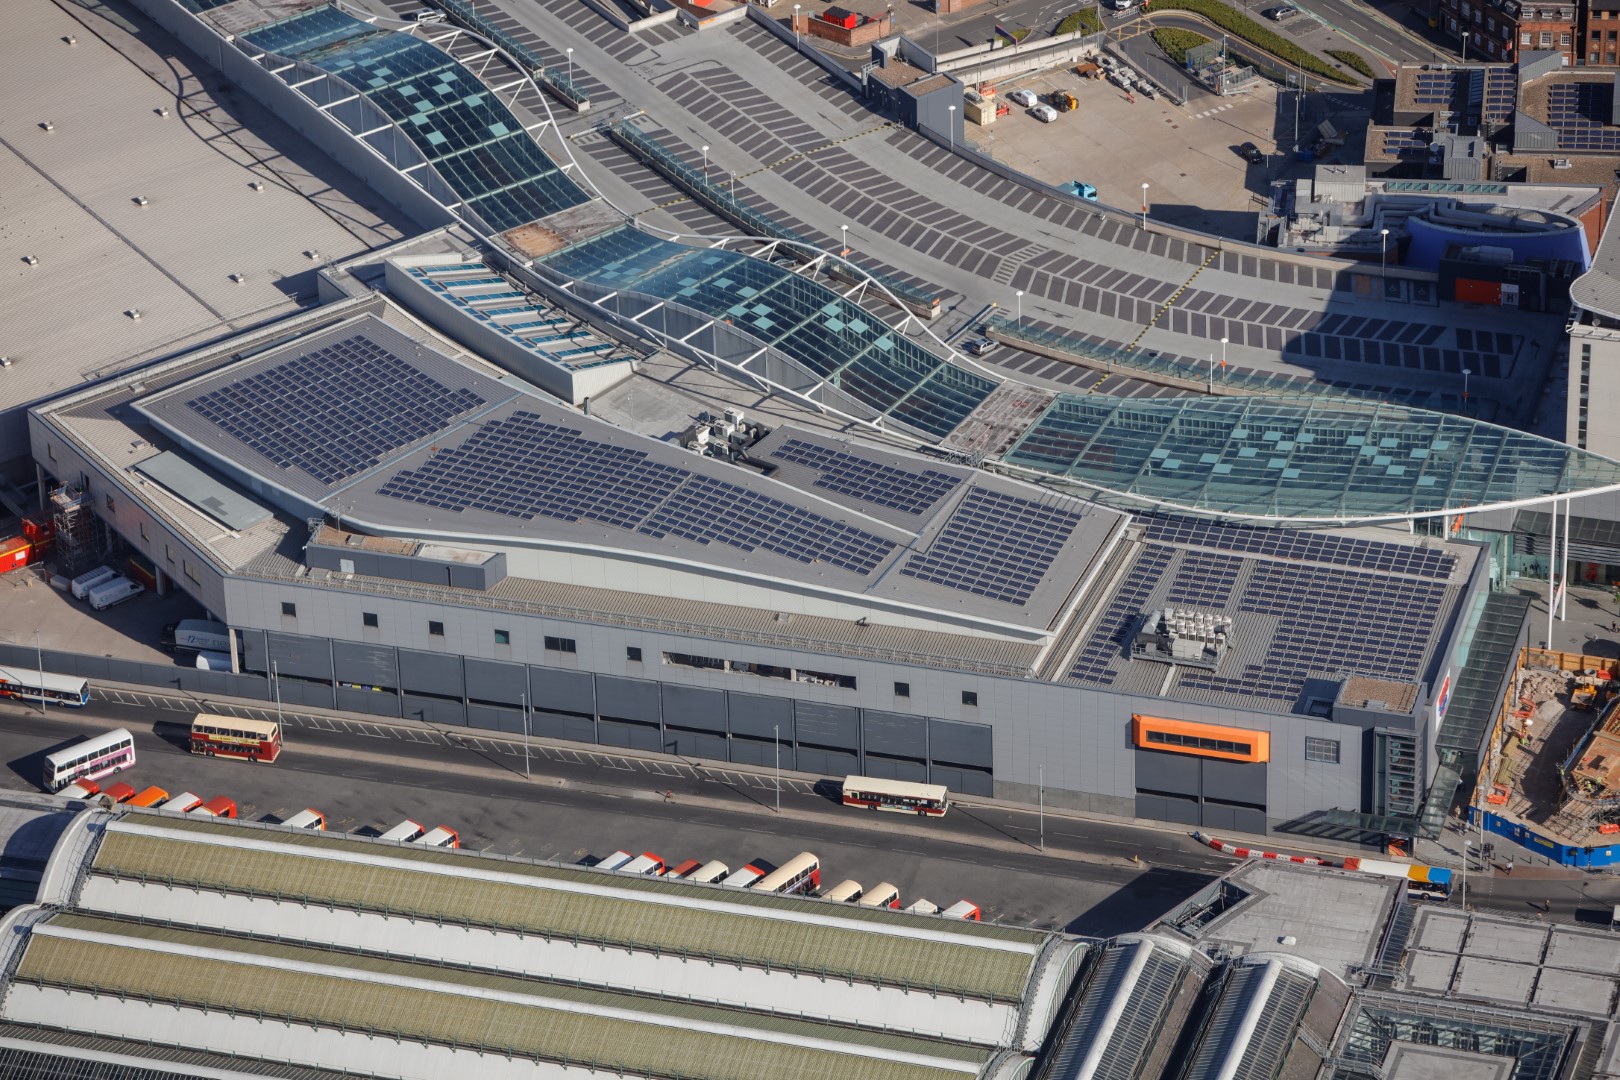 birds eye view of solar panels on shopping centre roof